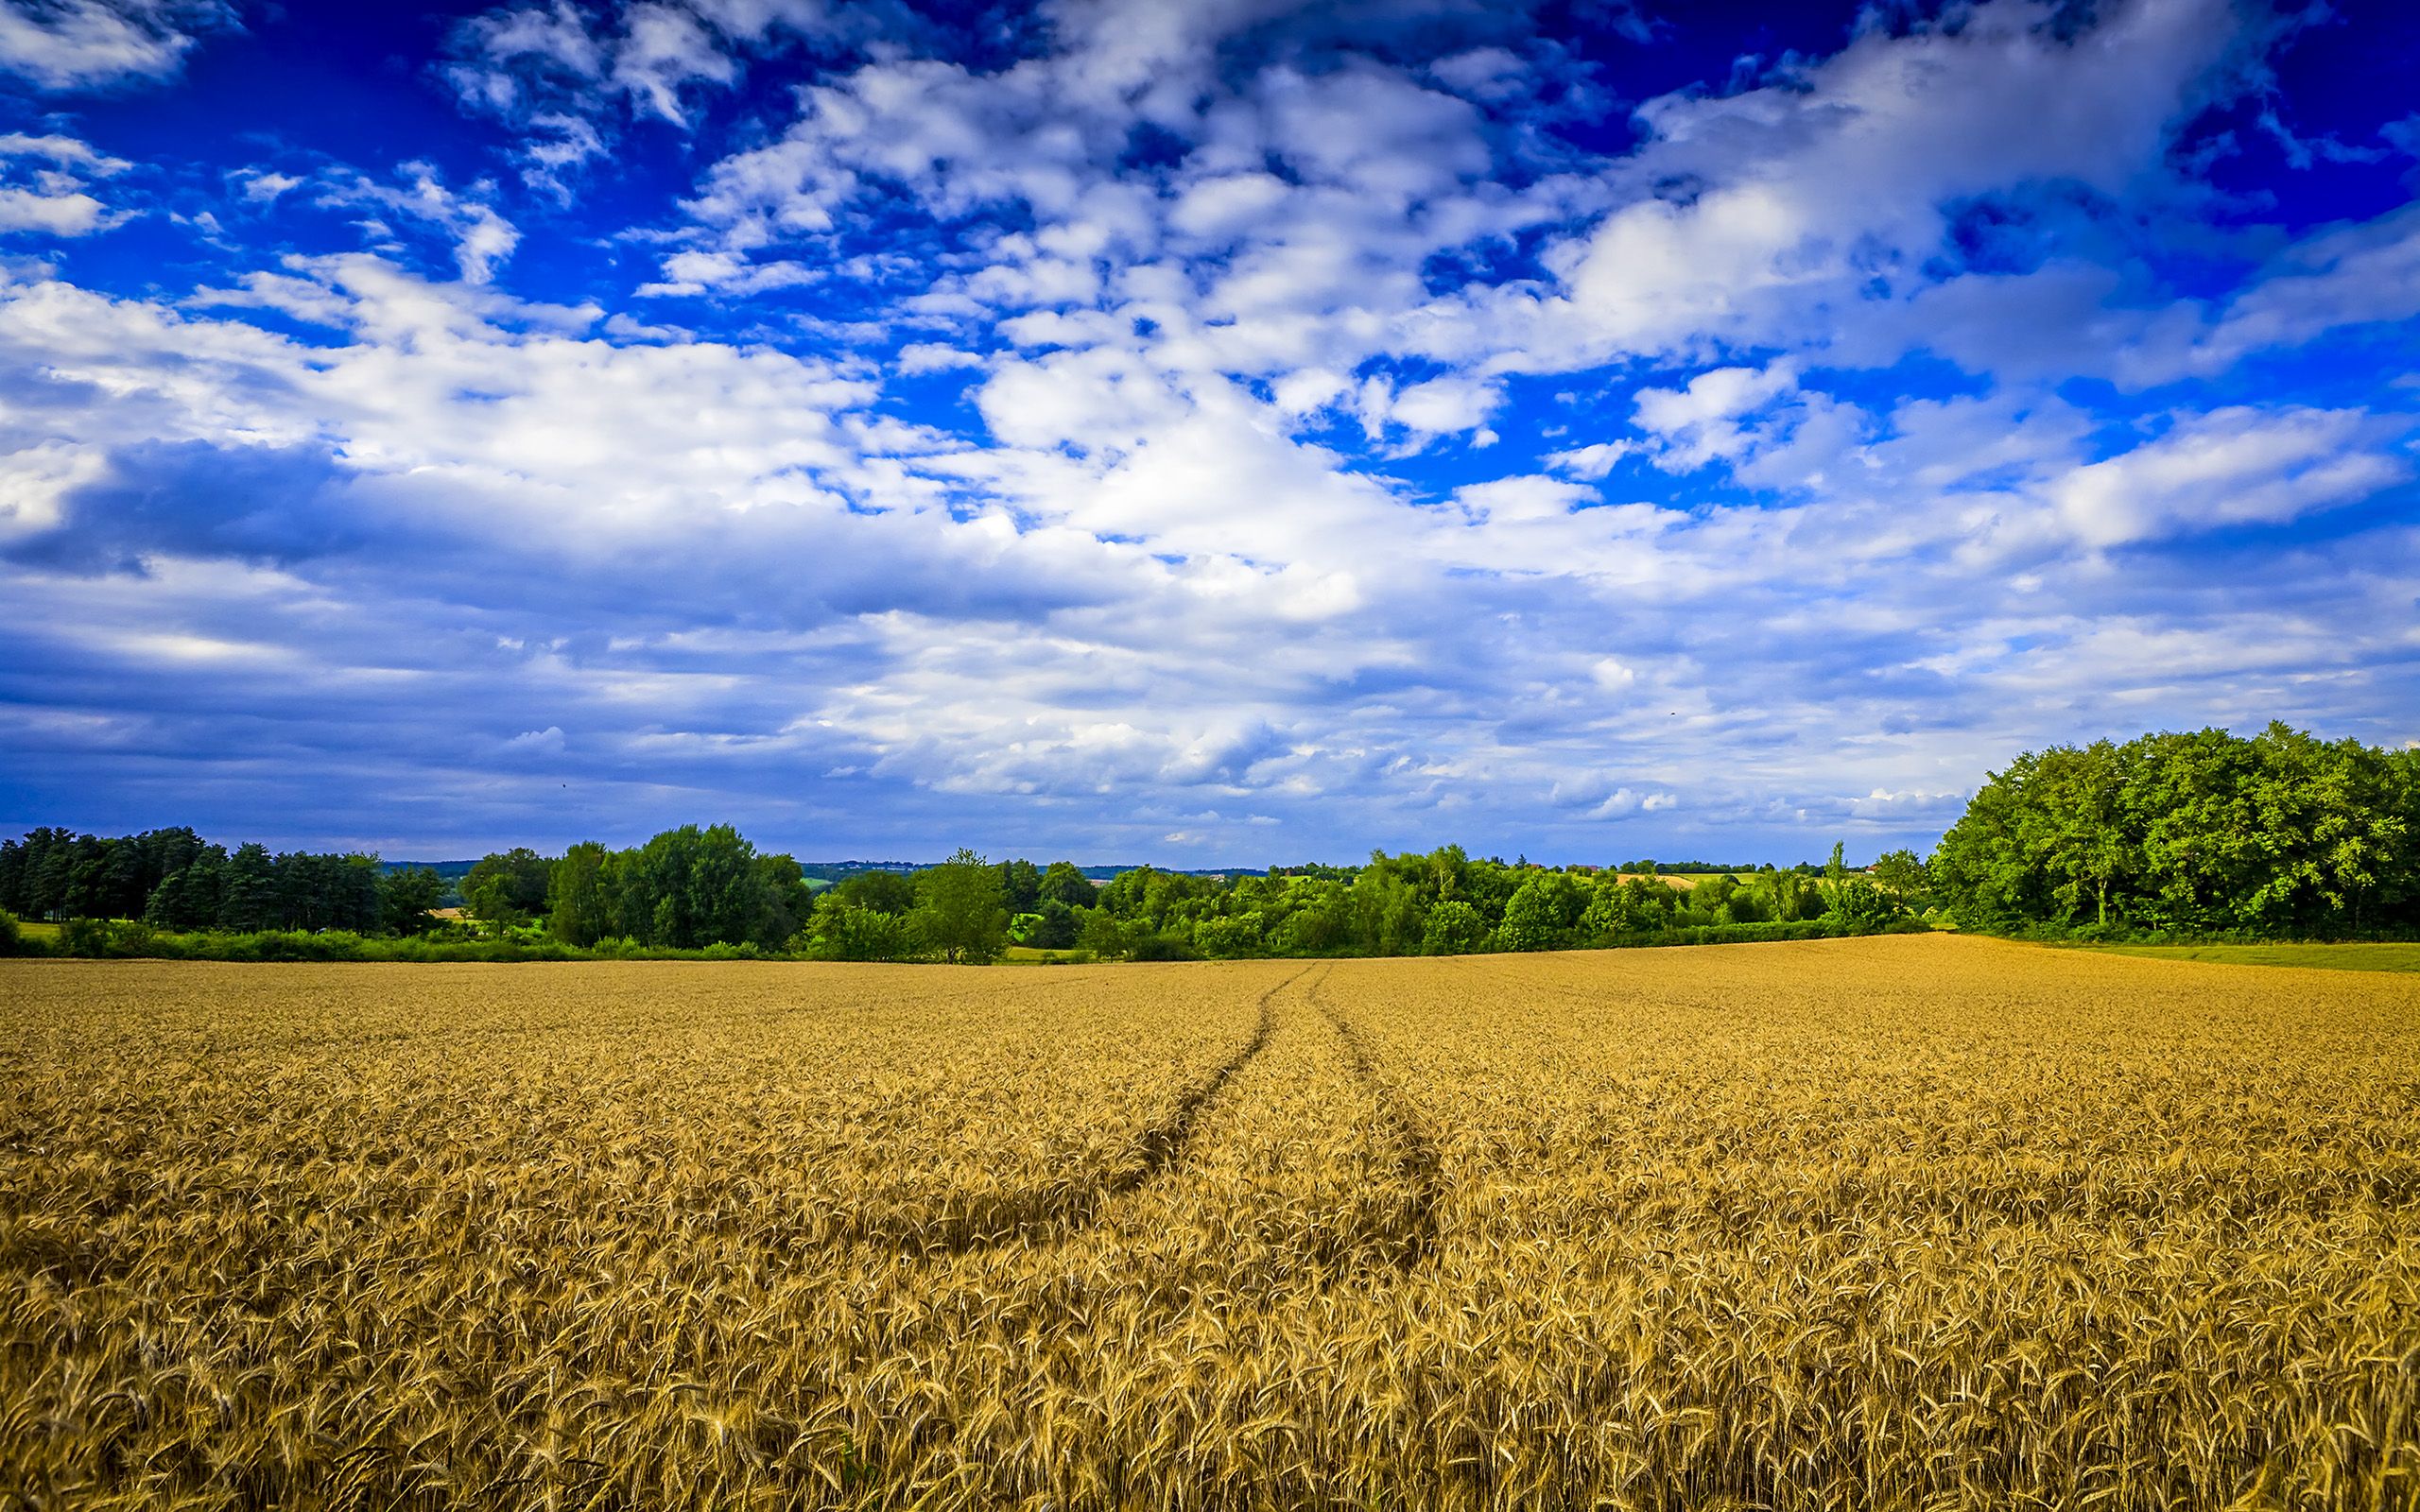 A large field of wheat with a blue sky and clouds in the background. - Farm